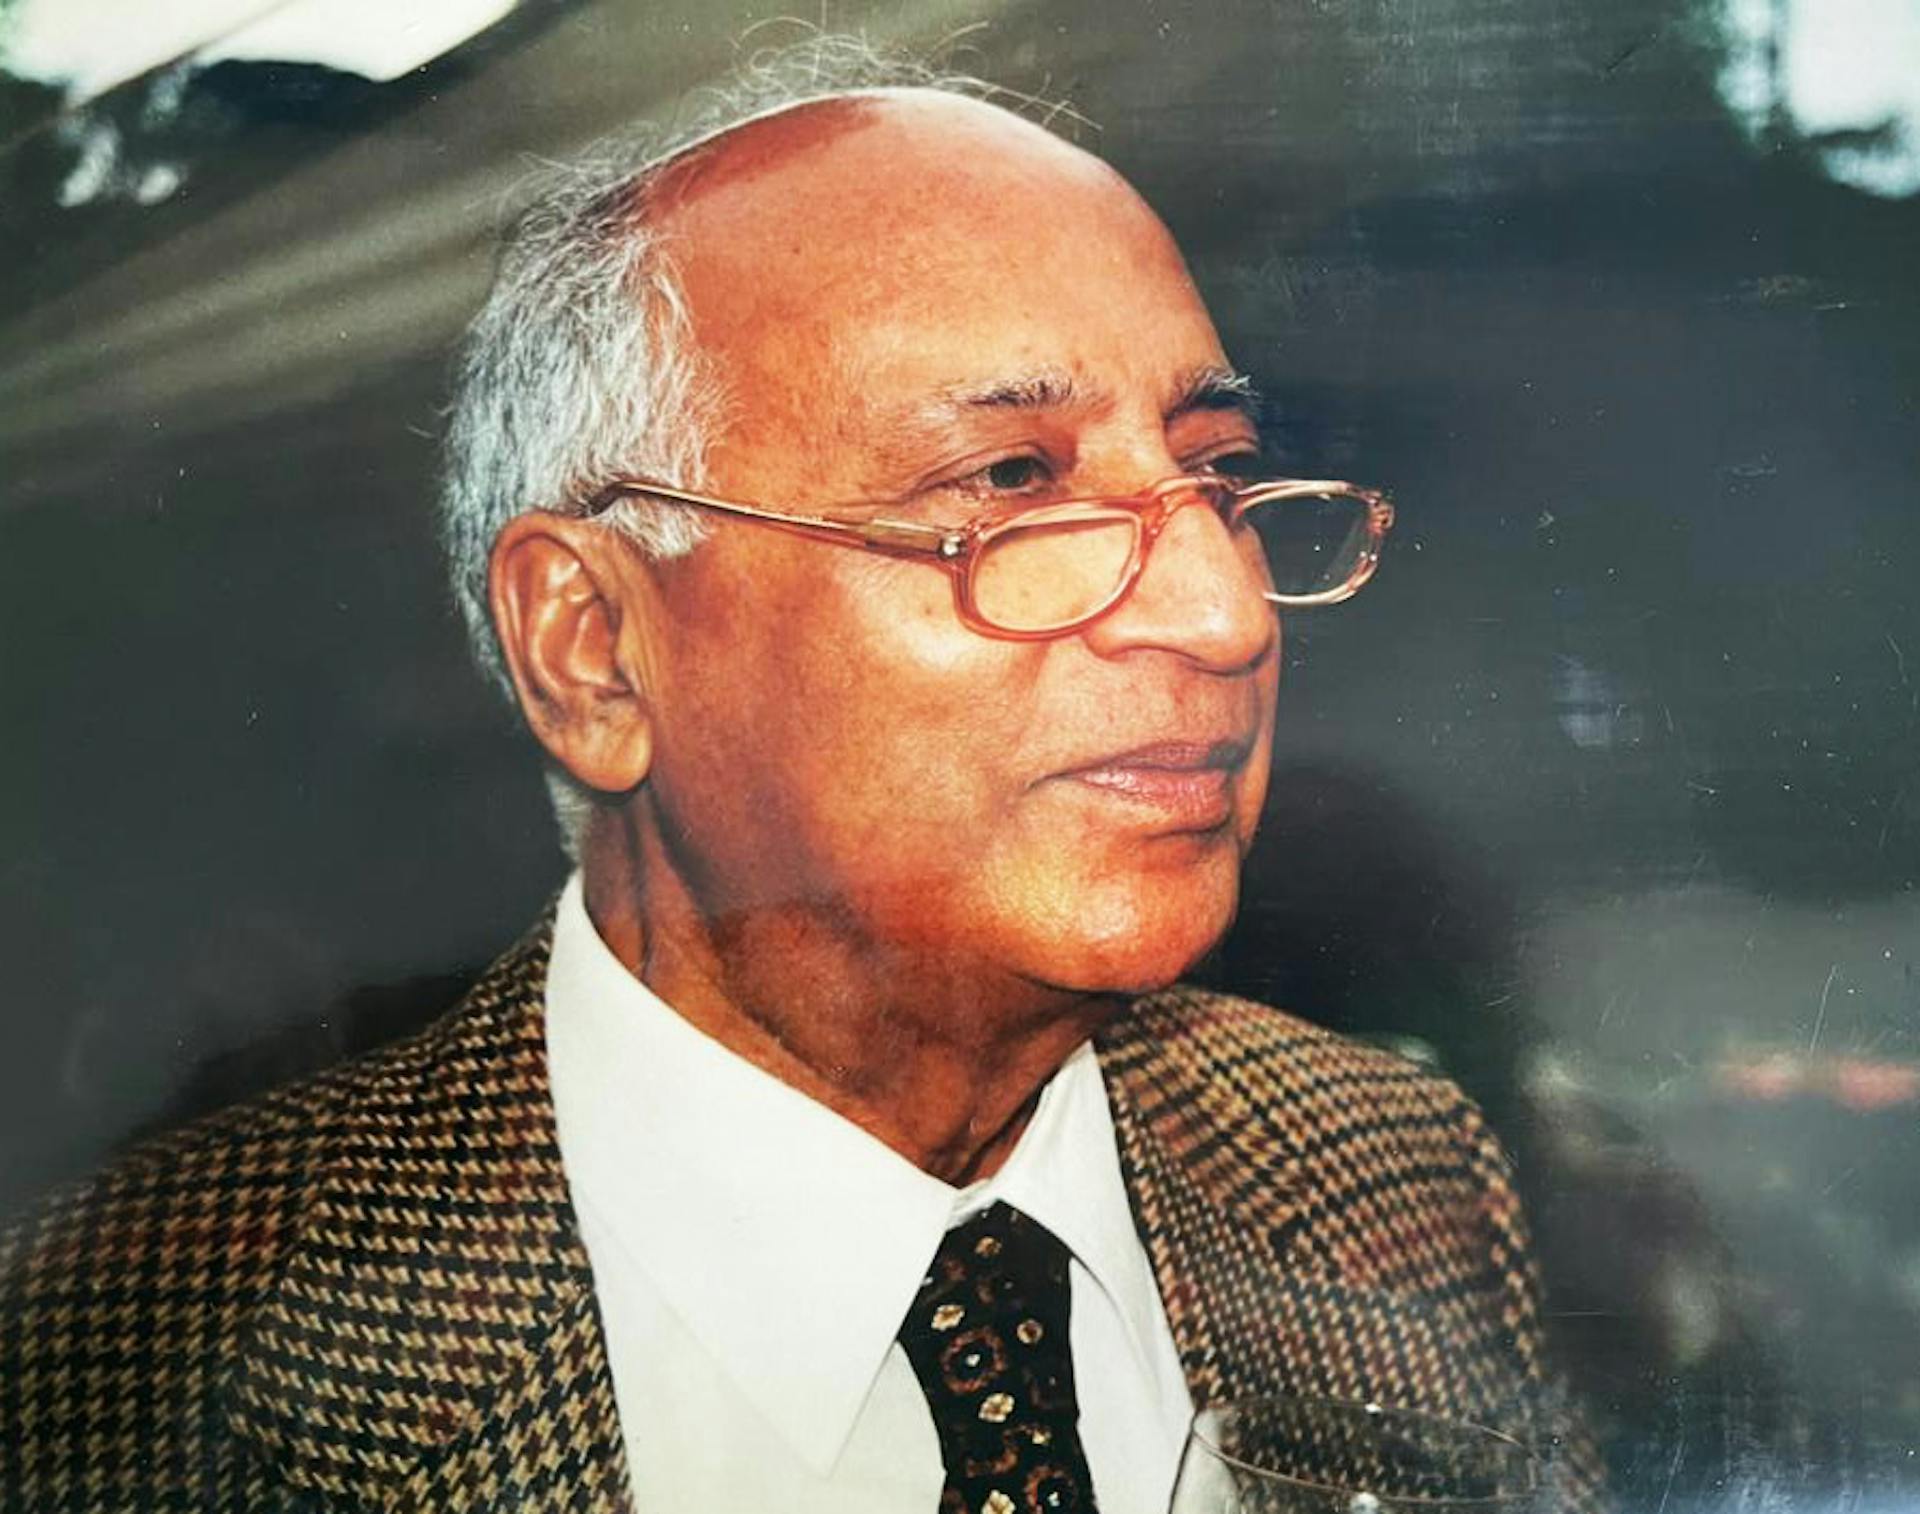 In 1997, Kapila was the first recipient of the Distinguished Service Award, awarded by the Law Society of Kenya. Credit: Sheetal Kapila.